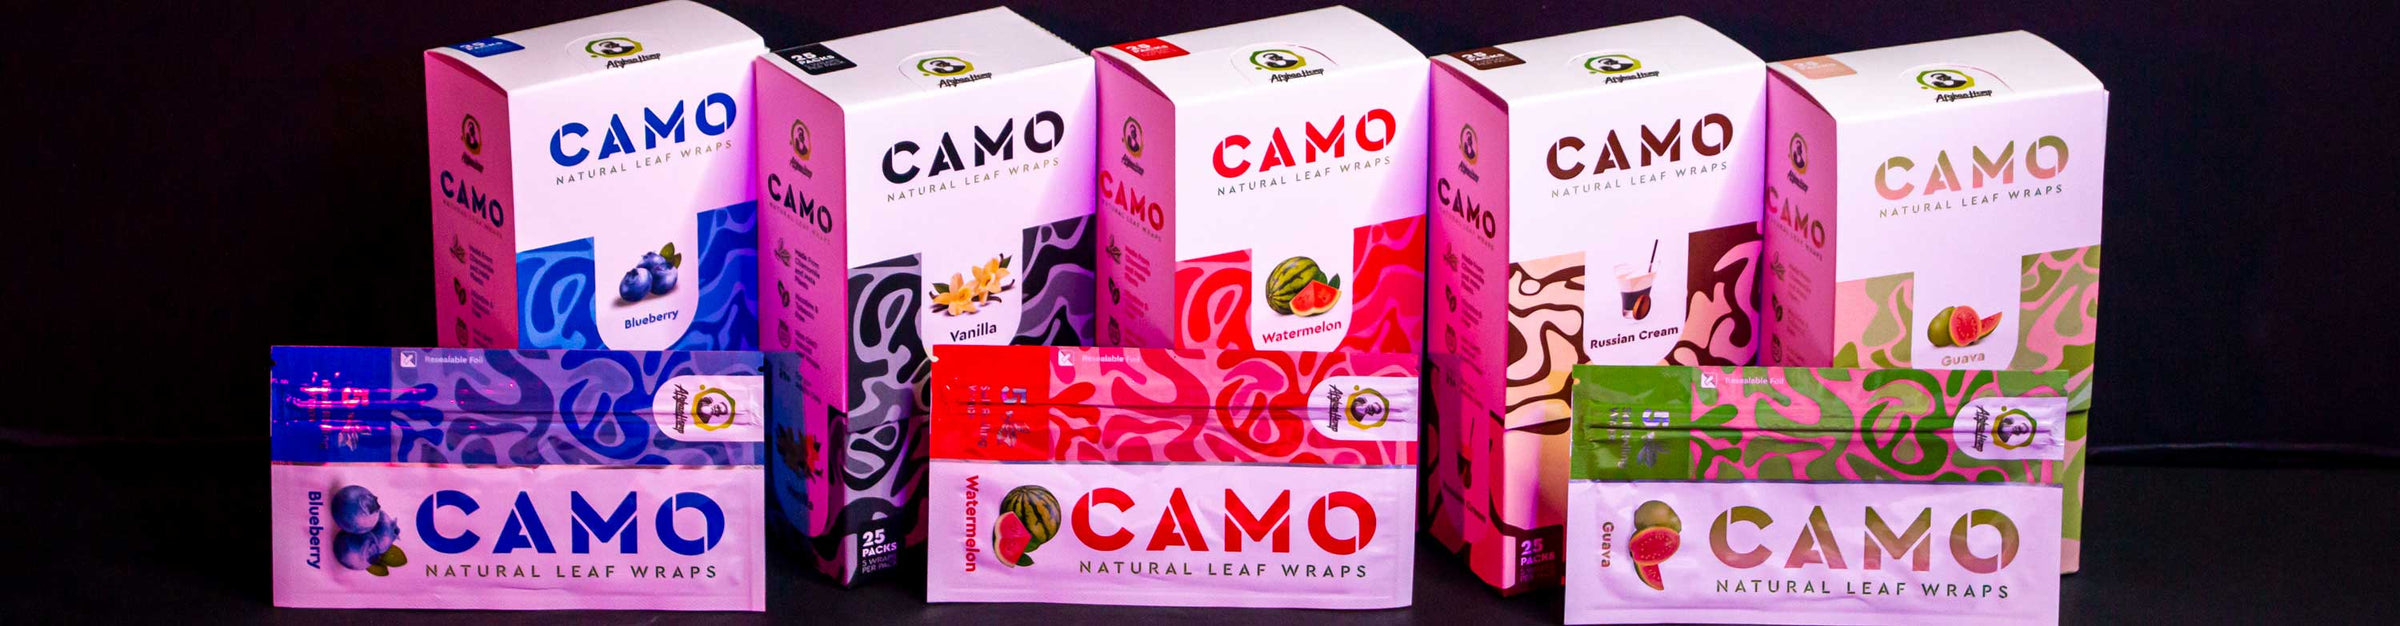 Wholesale Camo Wraps flavors on black and white textured wall in studio background